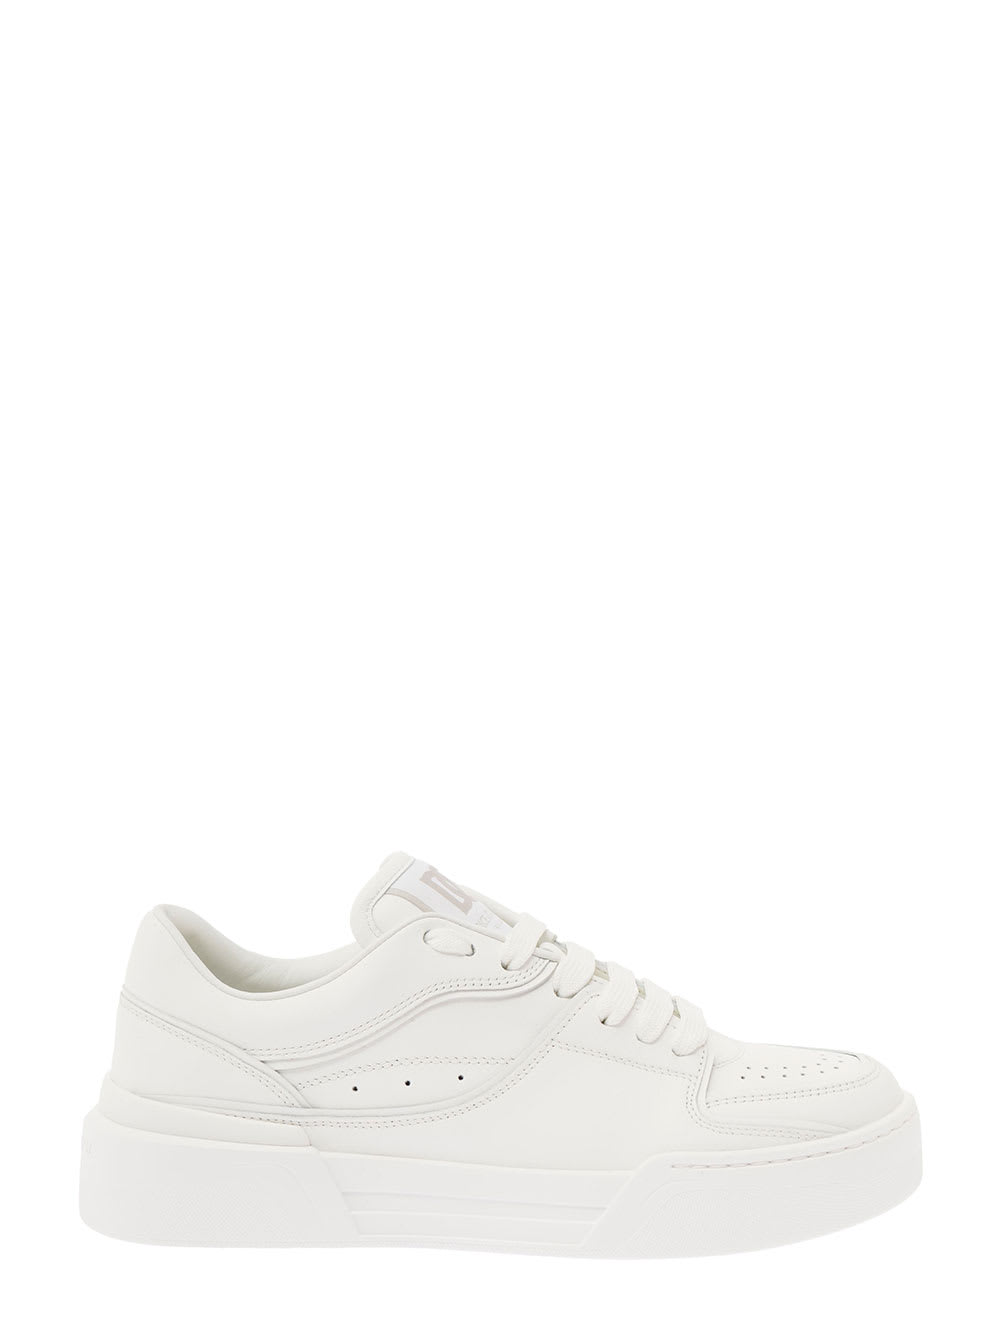 New Roma White Sneakers With Contrasting 3d Details Woman Dolce & Gabbana